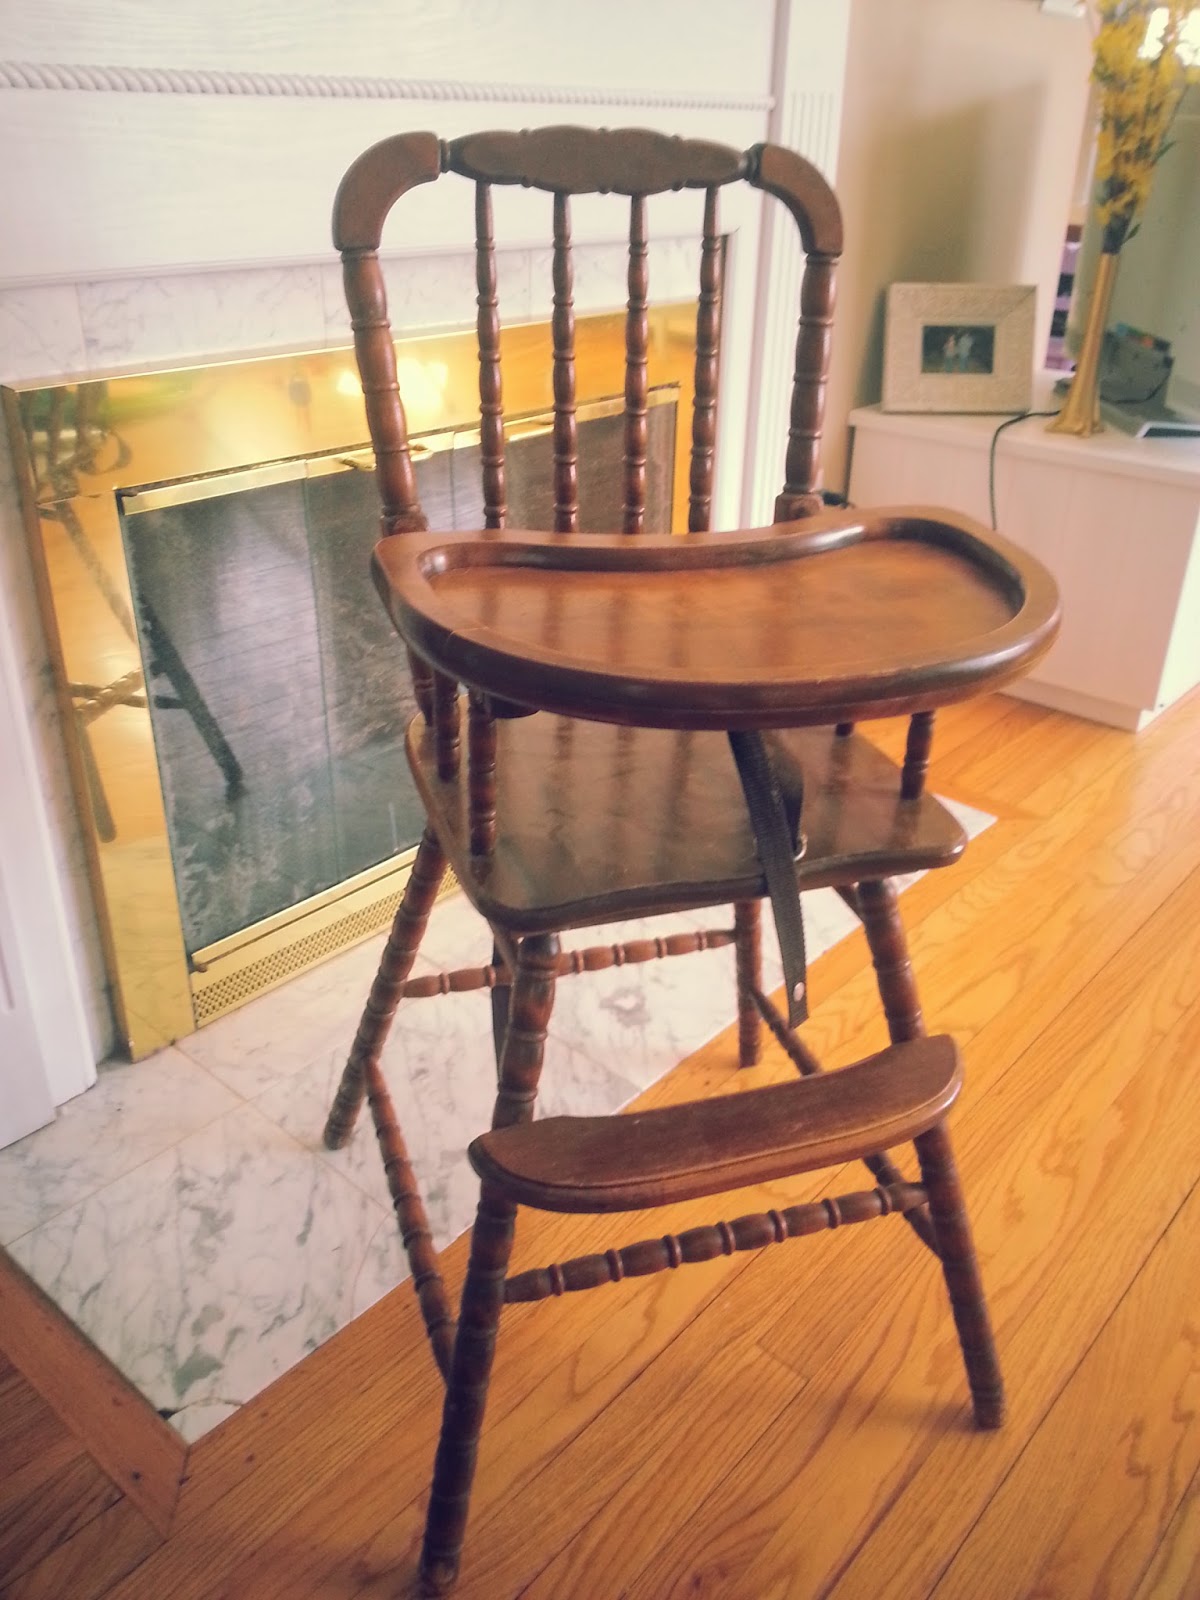 Bloom Client Project Vintage High Chair In Milk Paint